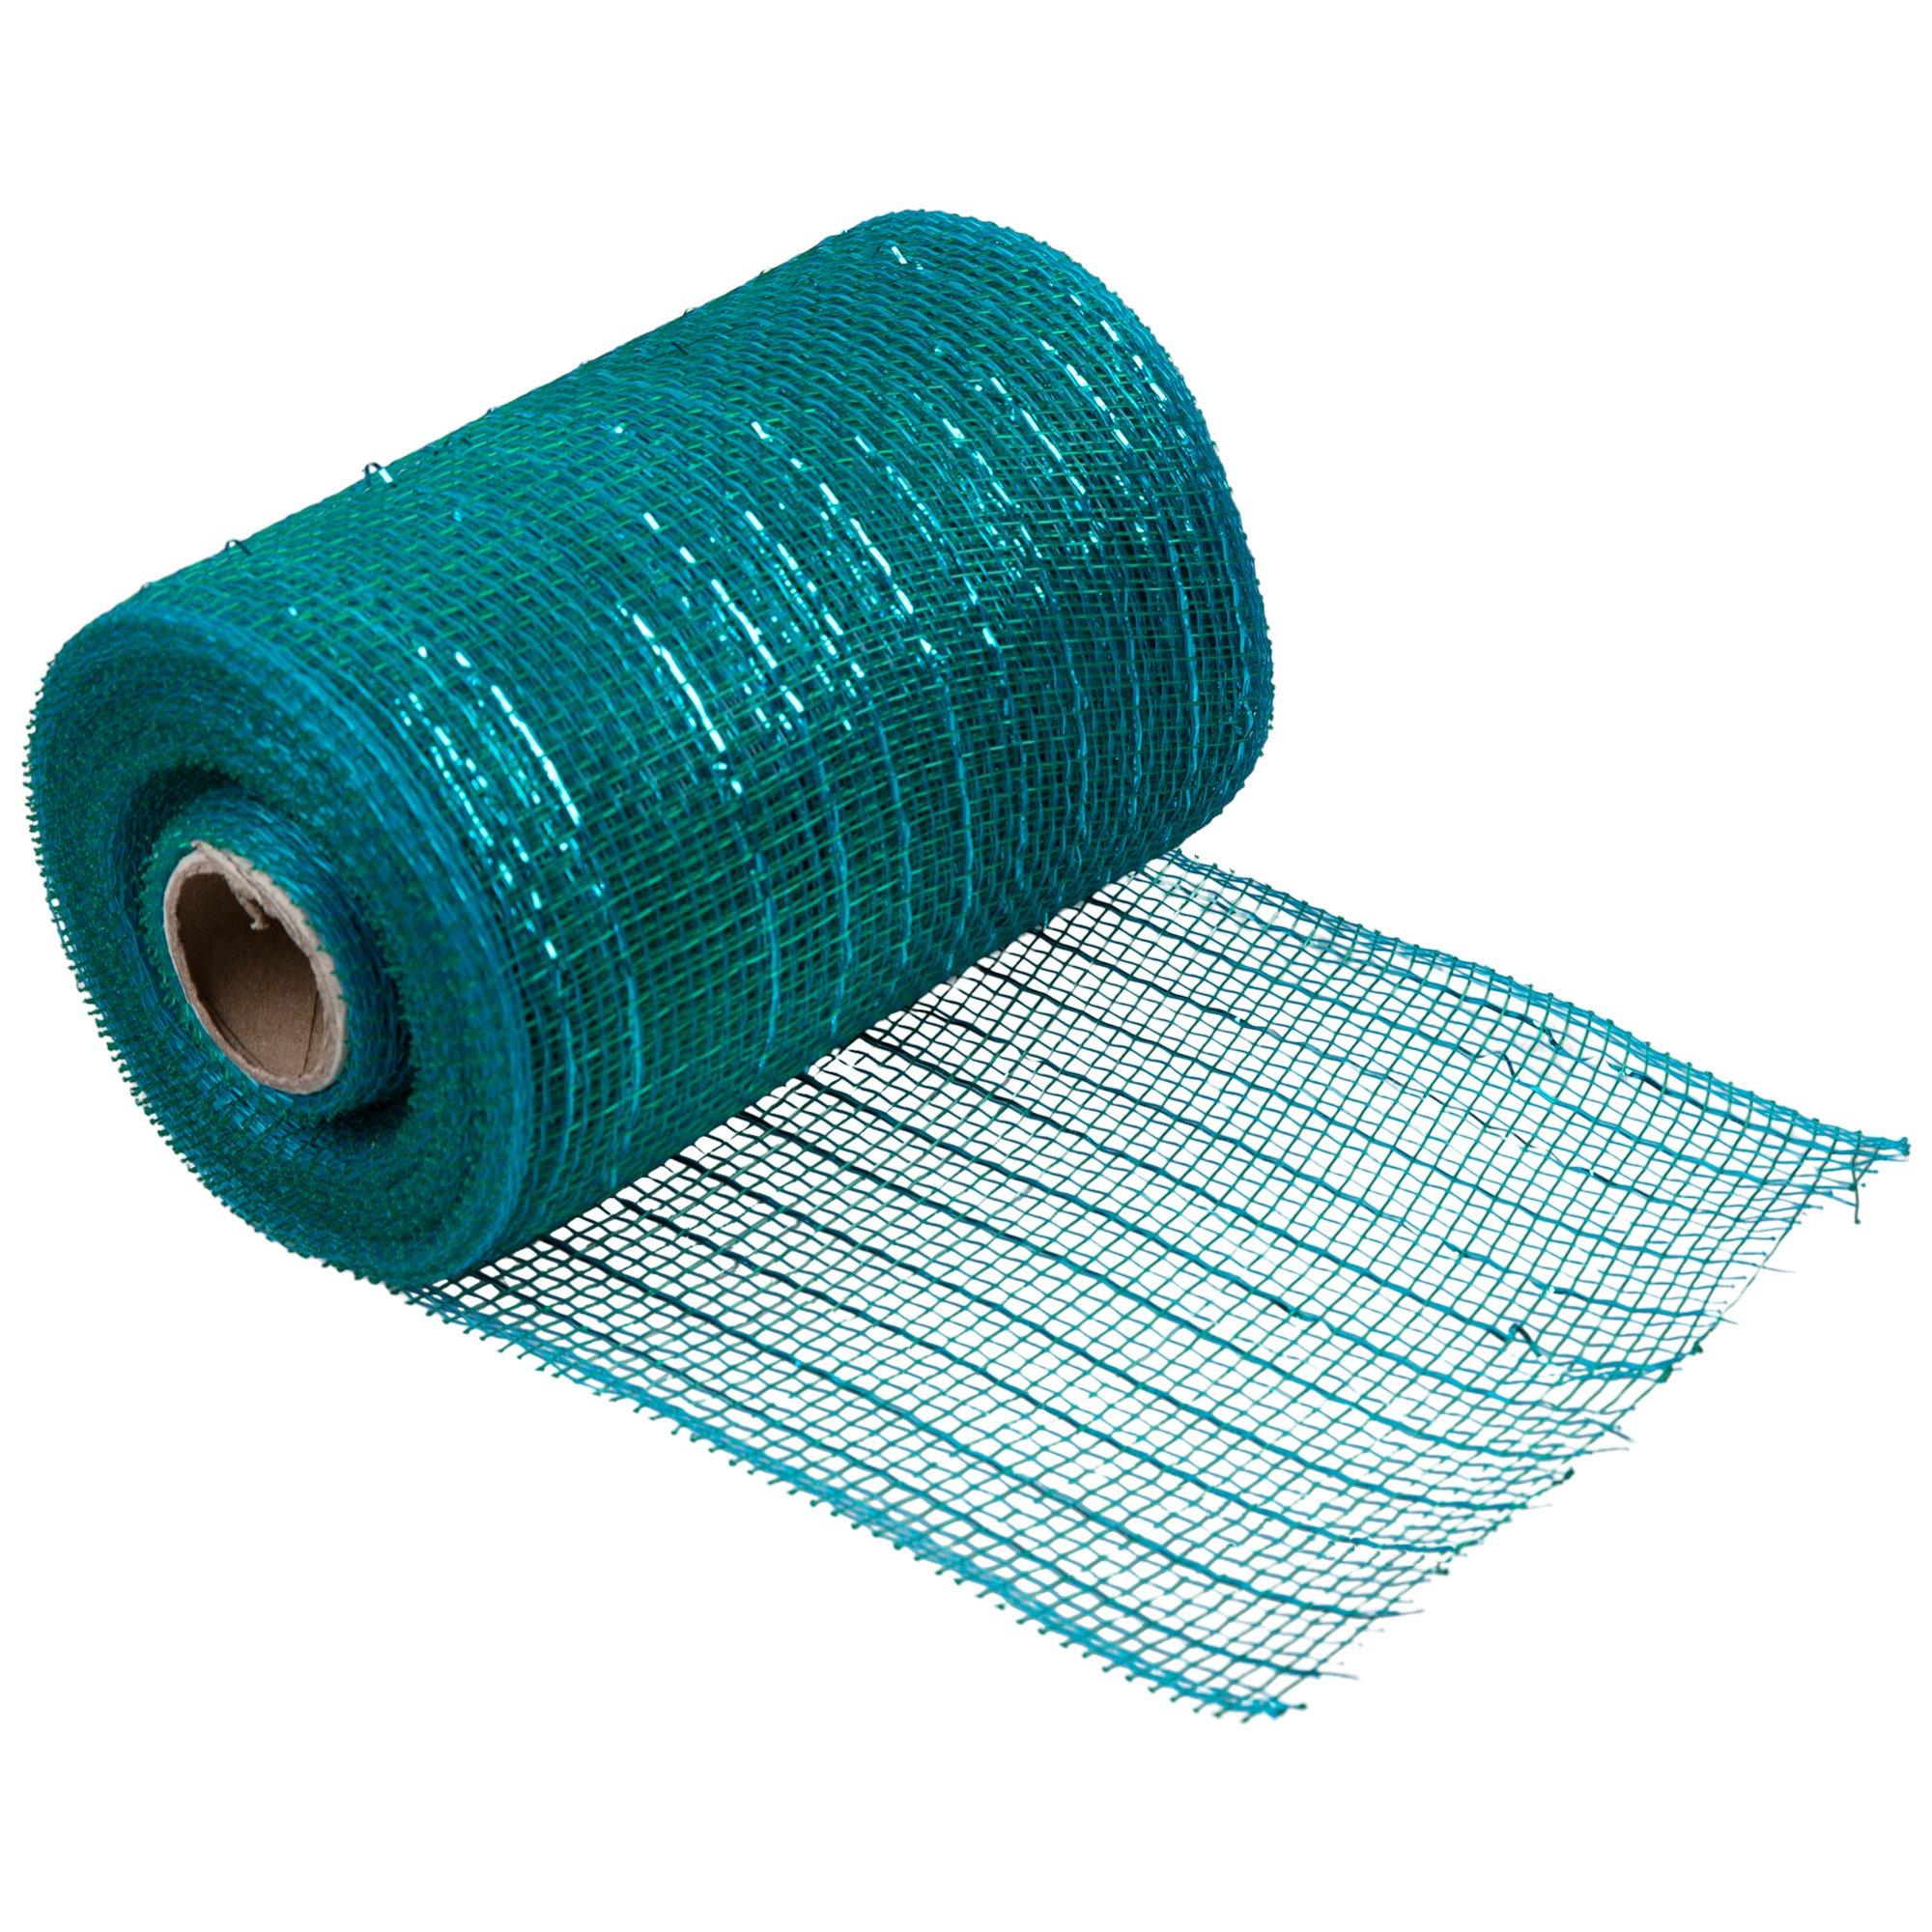 Turquoise Teal Blue 5.5 Wide Deco Metallic Foil Mesh Ribbon Roll 